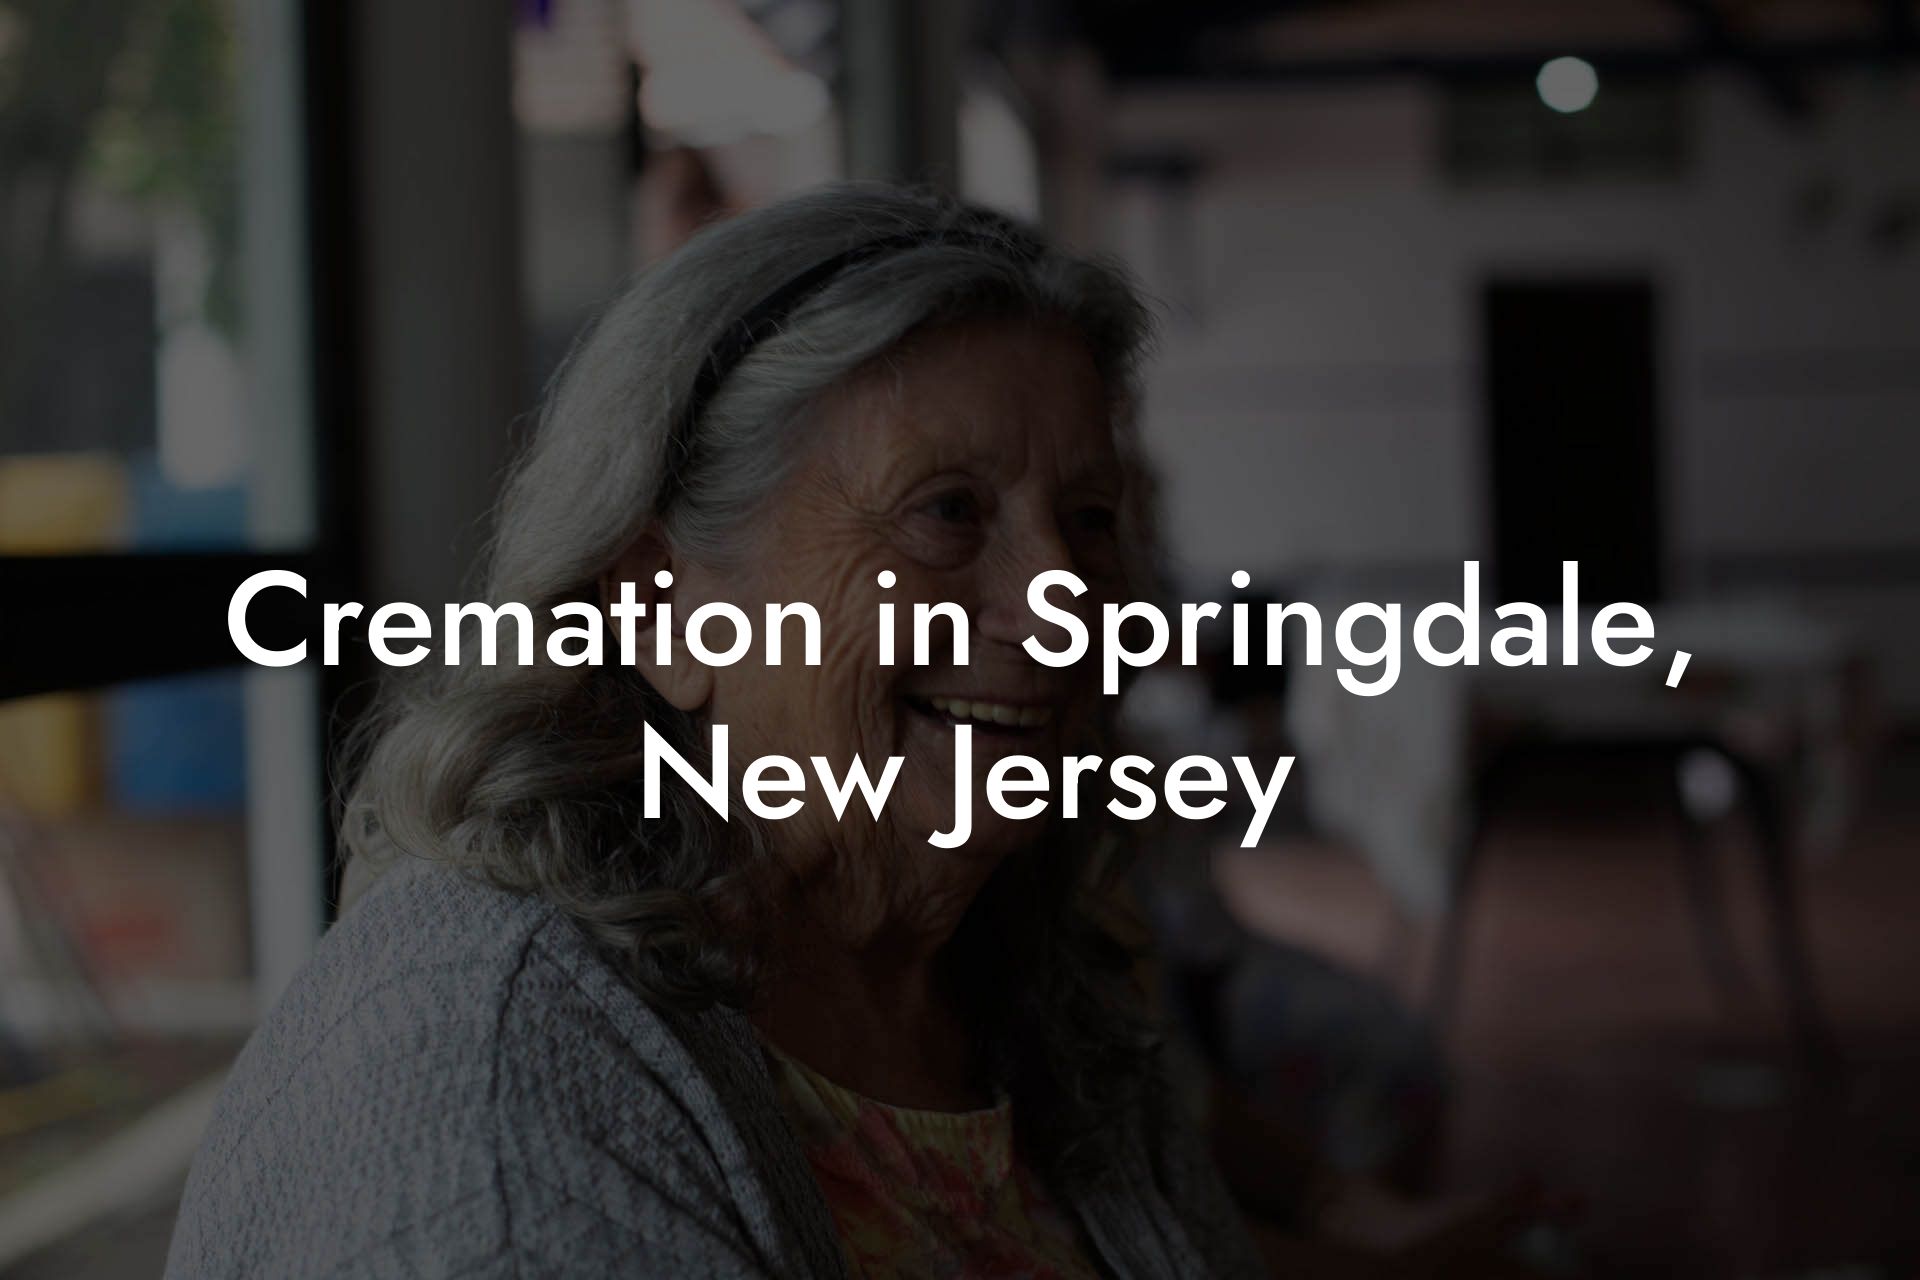 Cremation in Springdale, New Jersey